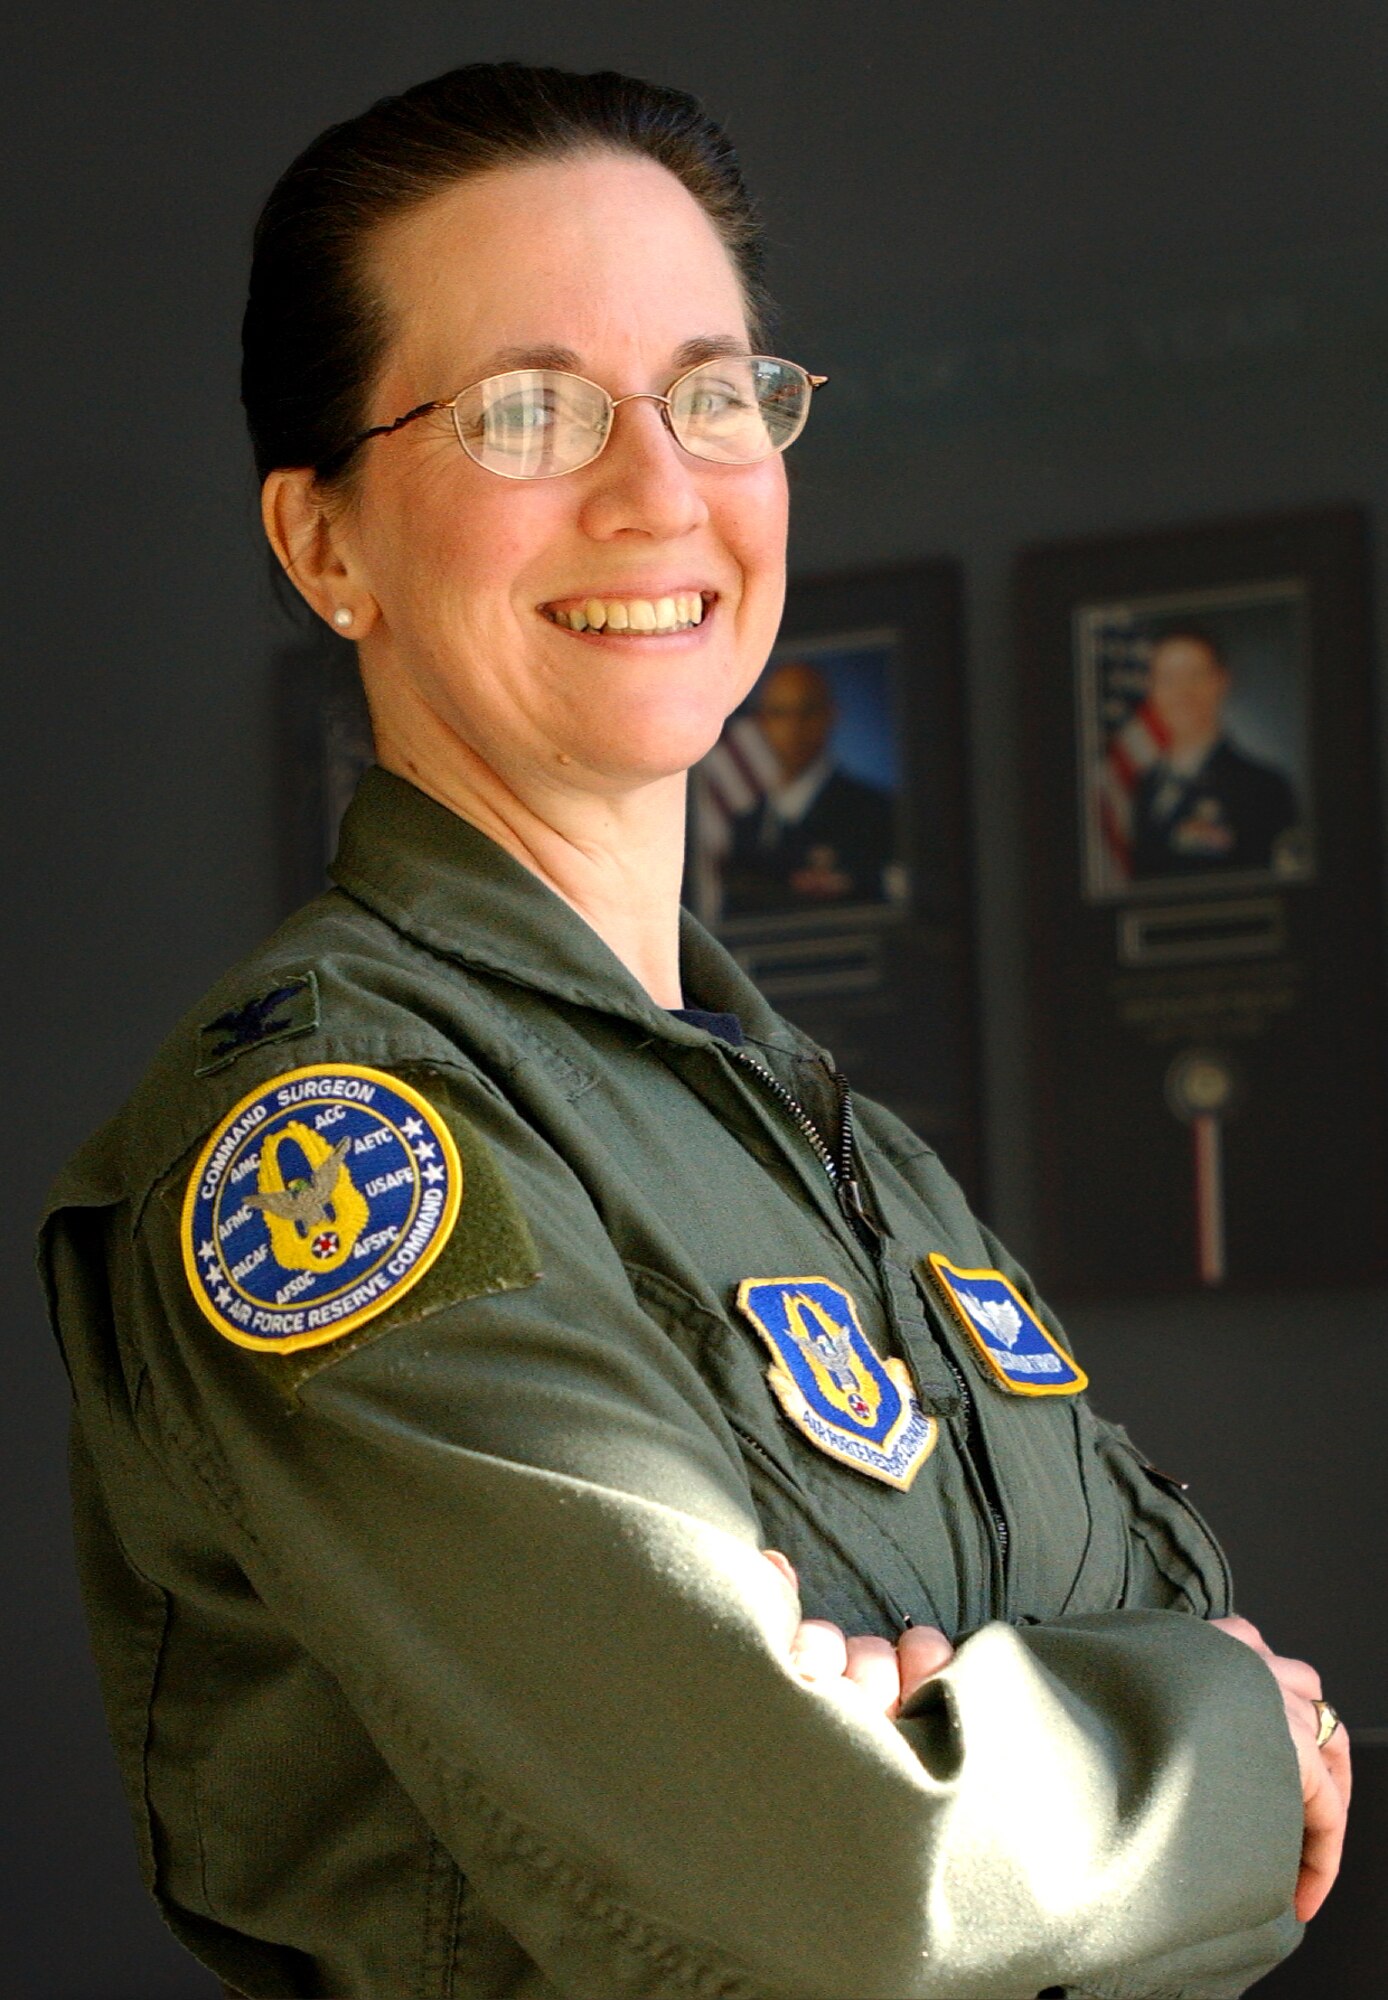 Col. Susan Northrup, a traditional reservist serving at Robins Air Force Base, Ga., was recently selected to serve as an aerospace medicine representatiave on the American Board of Preventive Medicine. As a board member, Colonel Northrup will supervise the process of screening, testing and certifying people seeking board certification in occupational, preventive and aerospace medicine. 